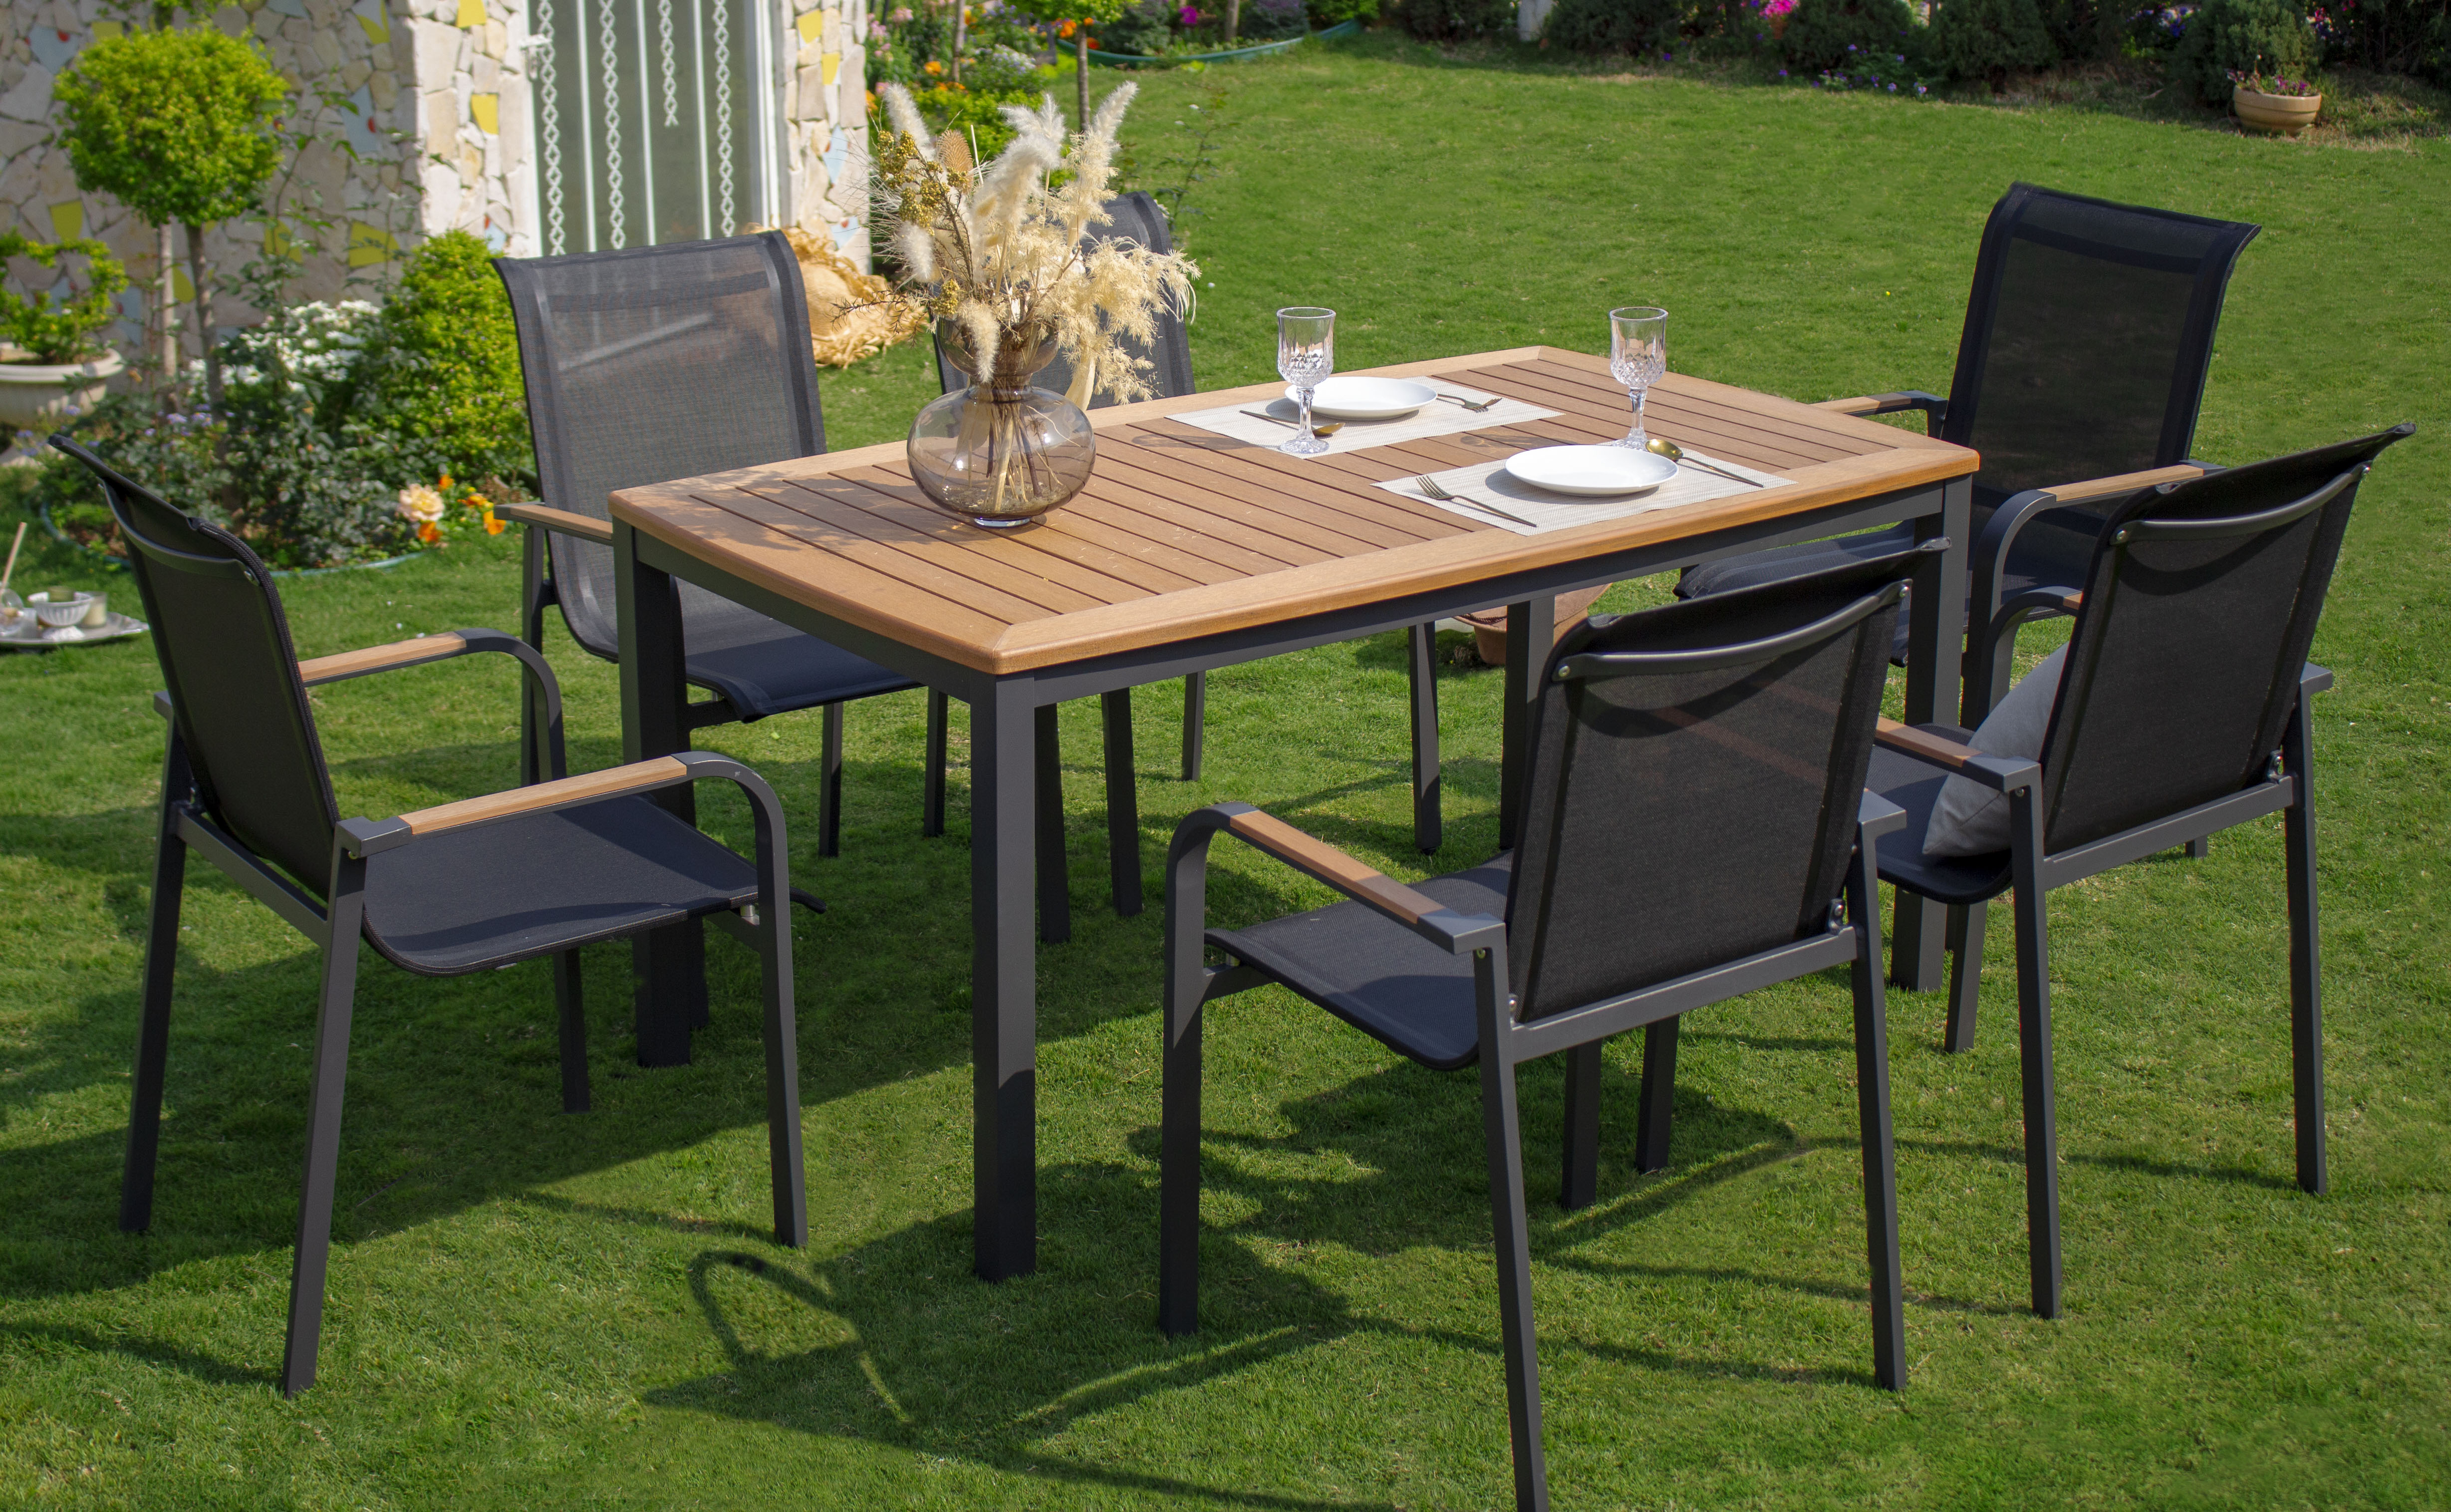 Cheapest Outdoor Furniture Polywood Table Wholesale Price